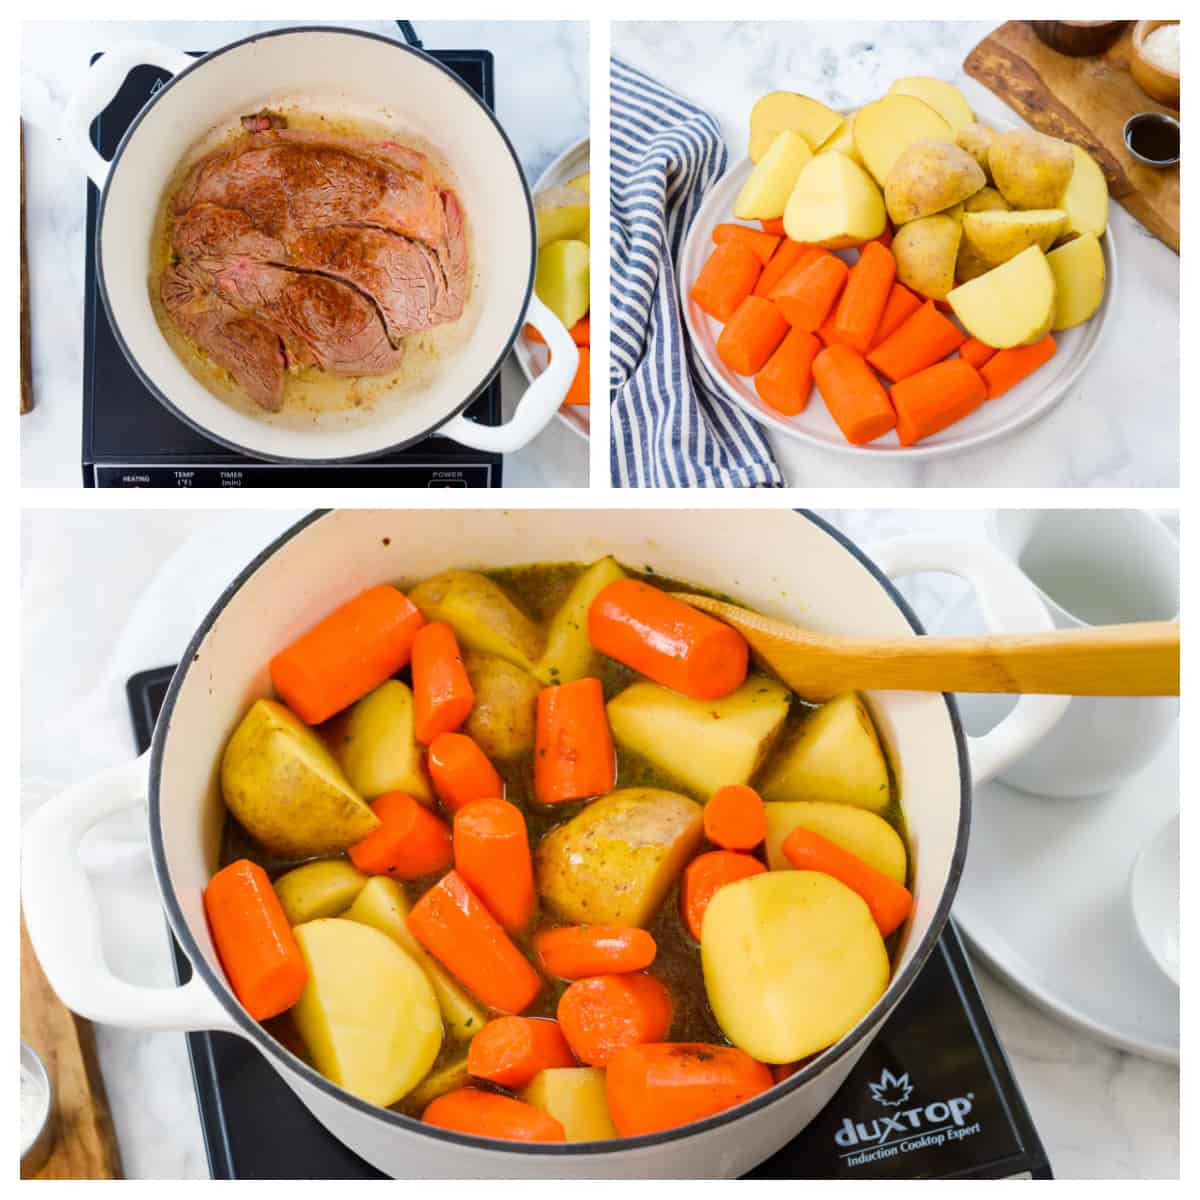 Collage showing how to make Mississippi pot roast in the oven.